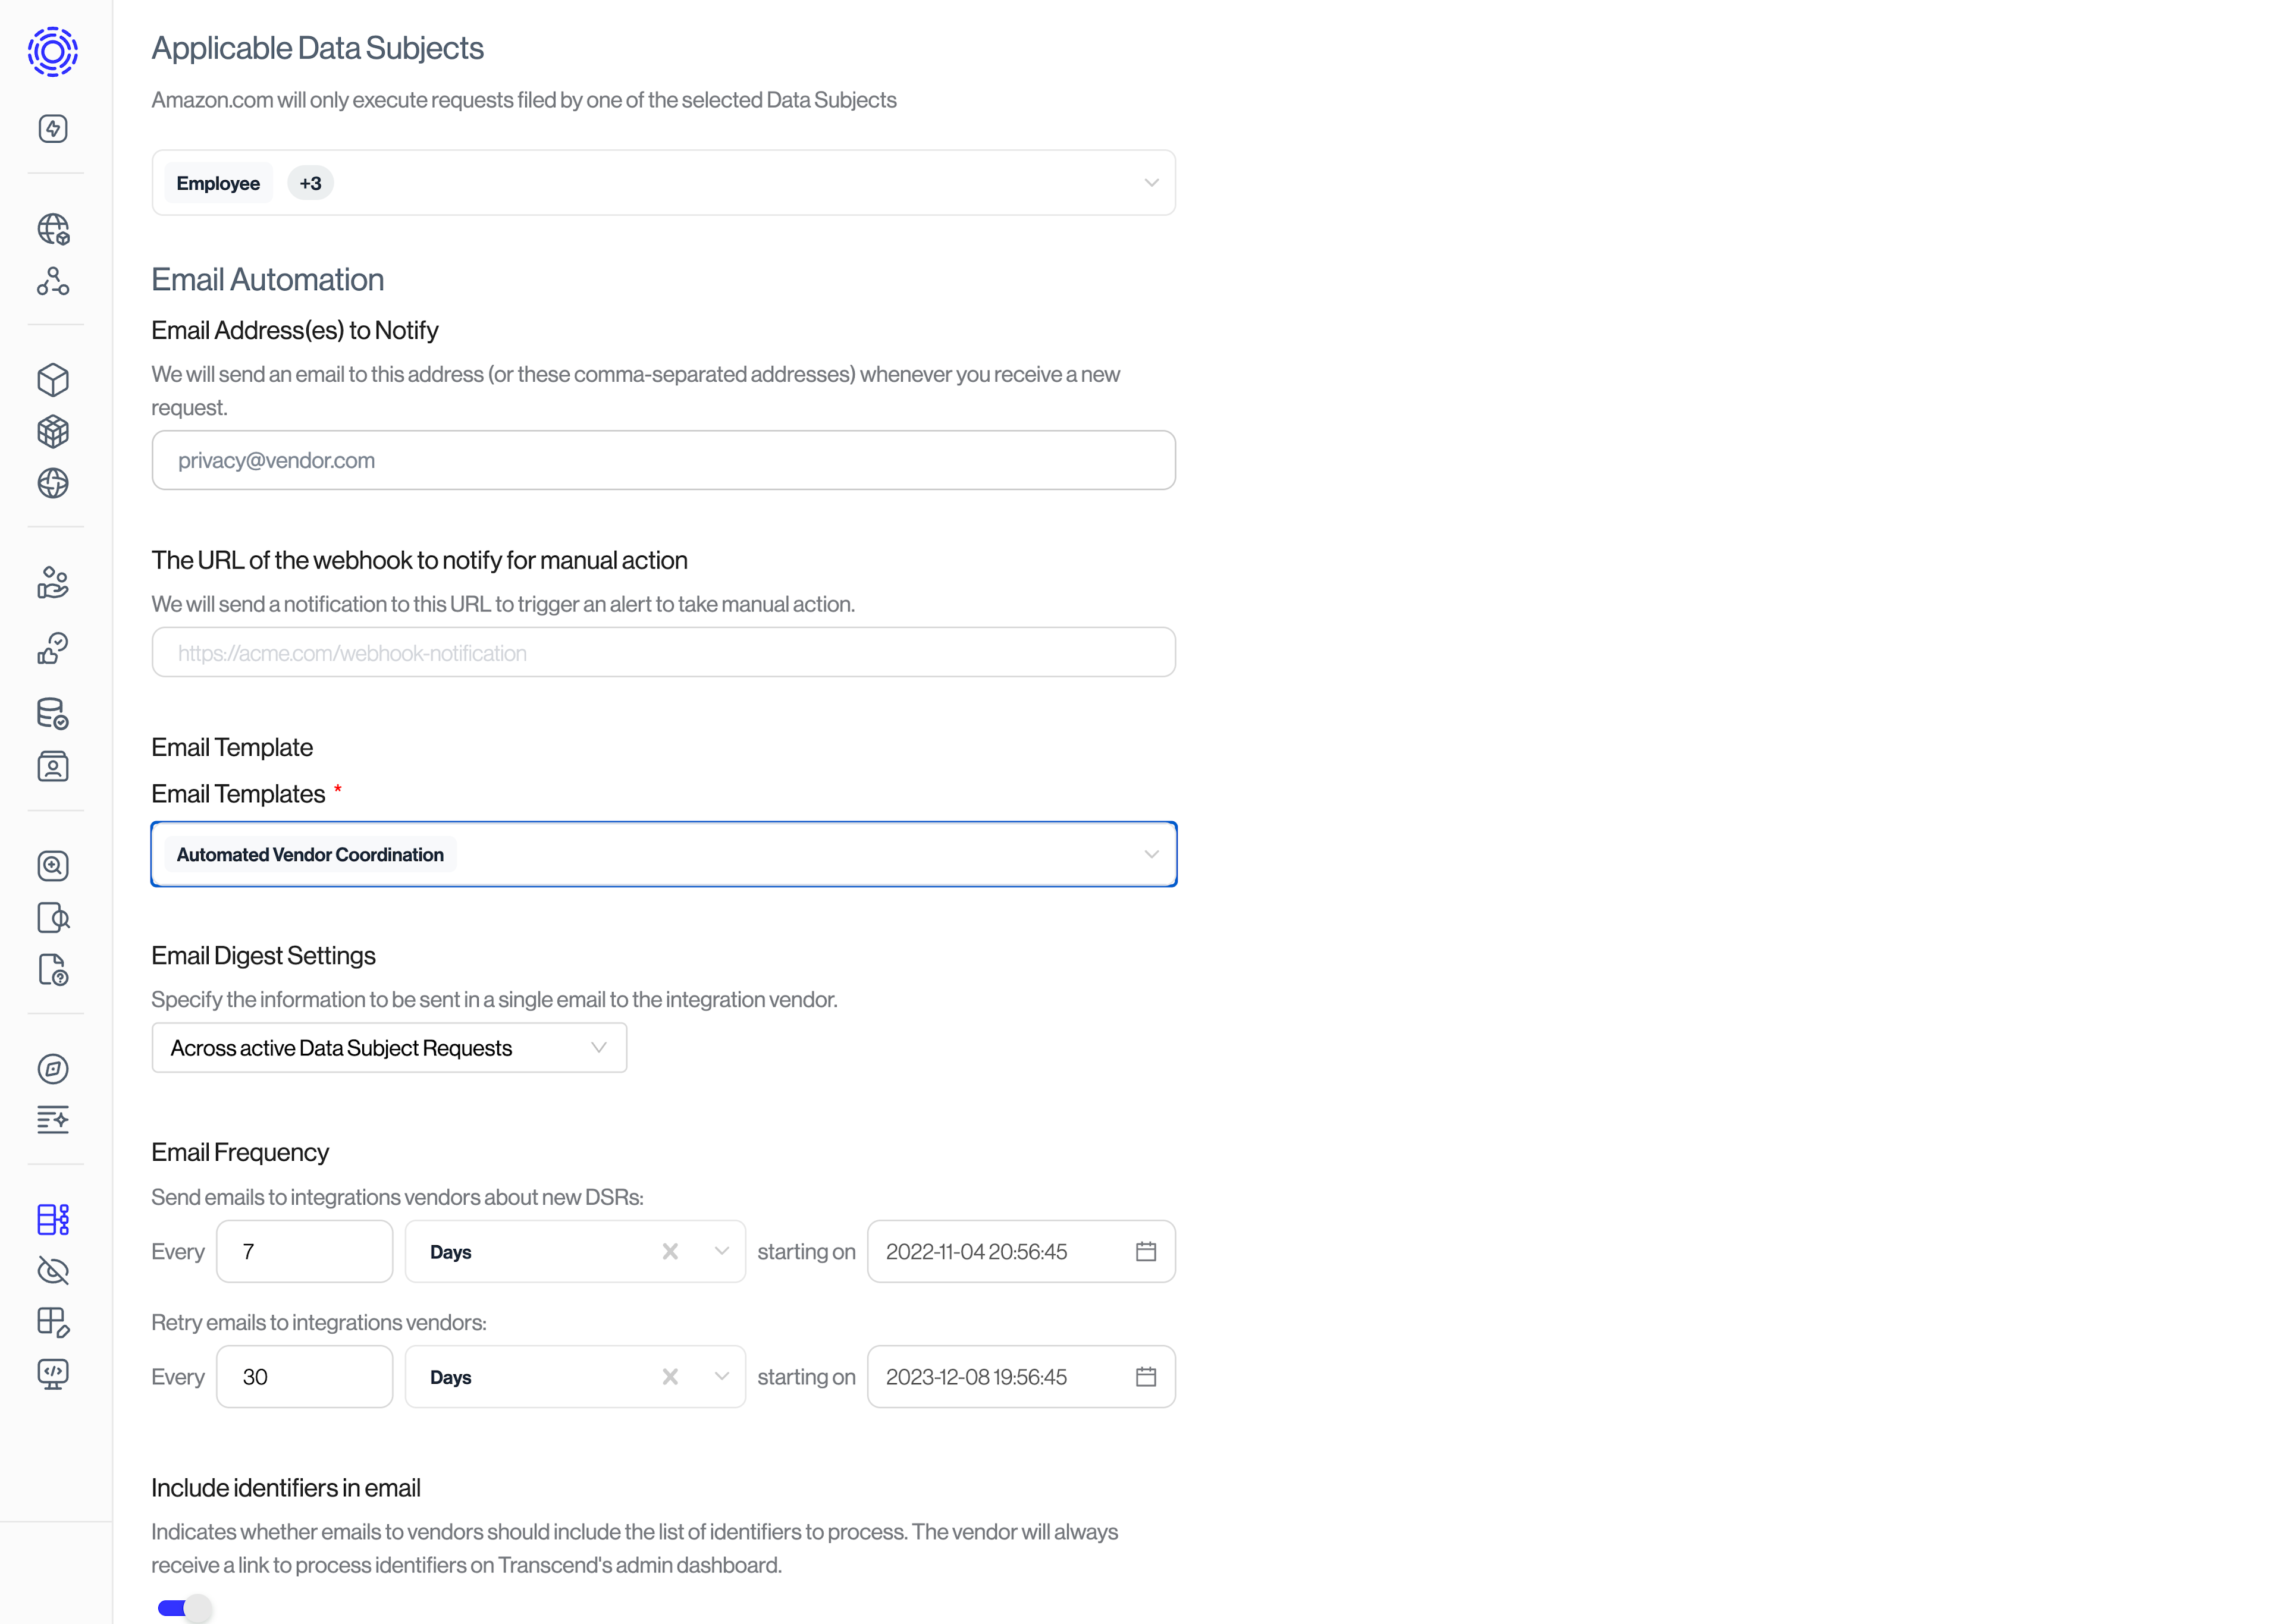 Integrations > DSR Automation, Email Automation settings